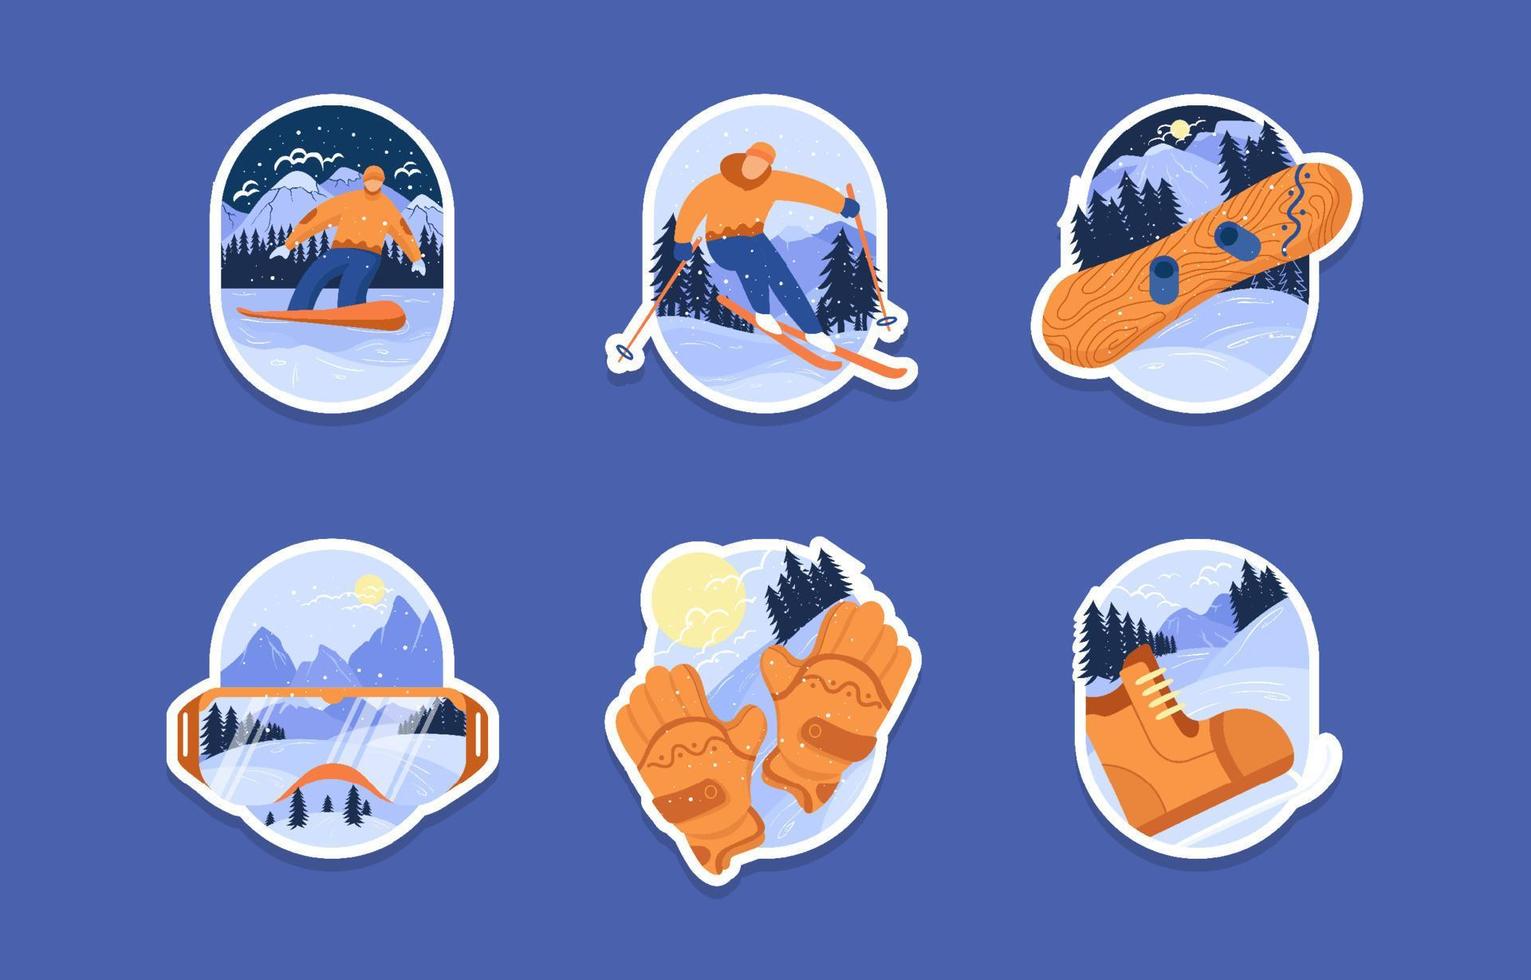 Playing Snow Sports Activity on Winter Sticker Set vector